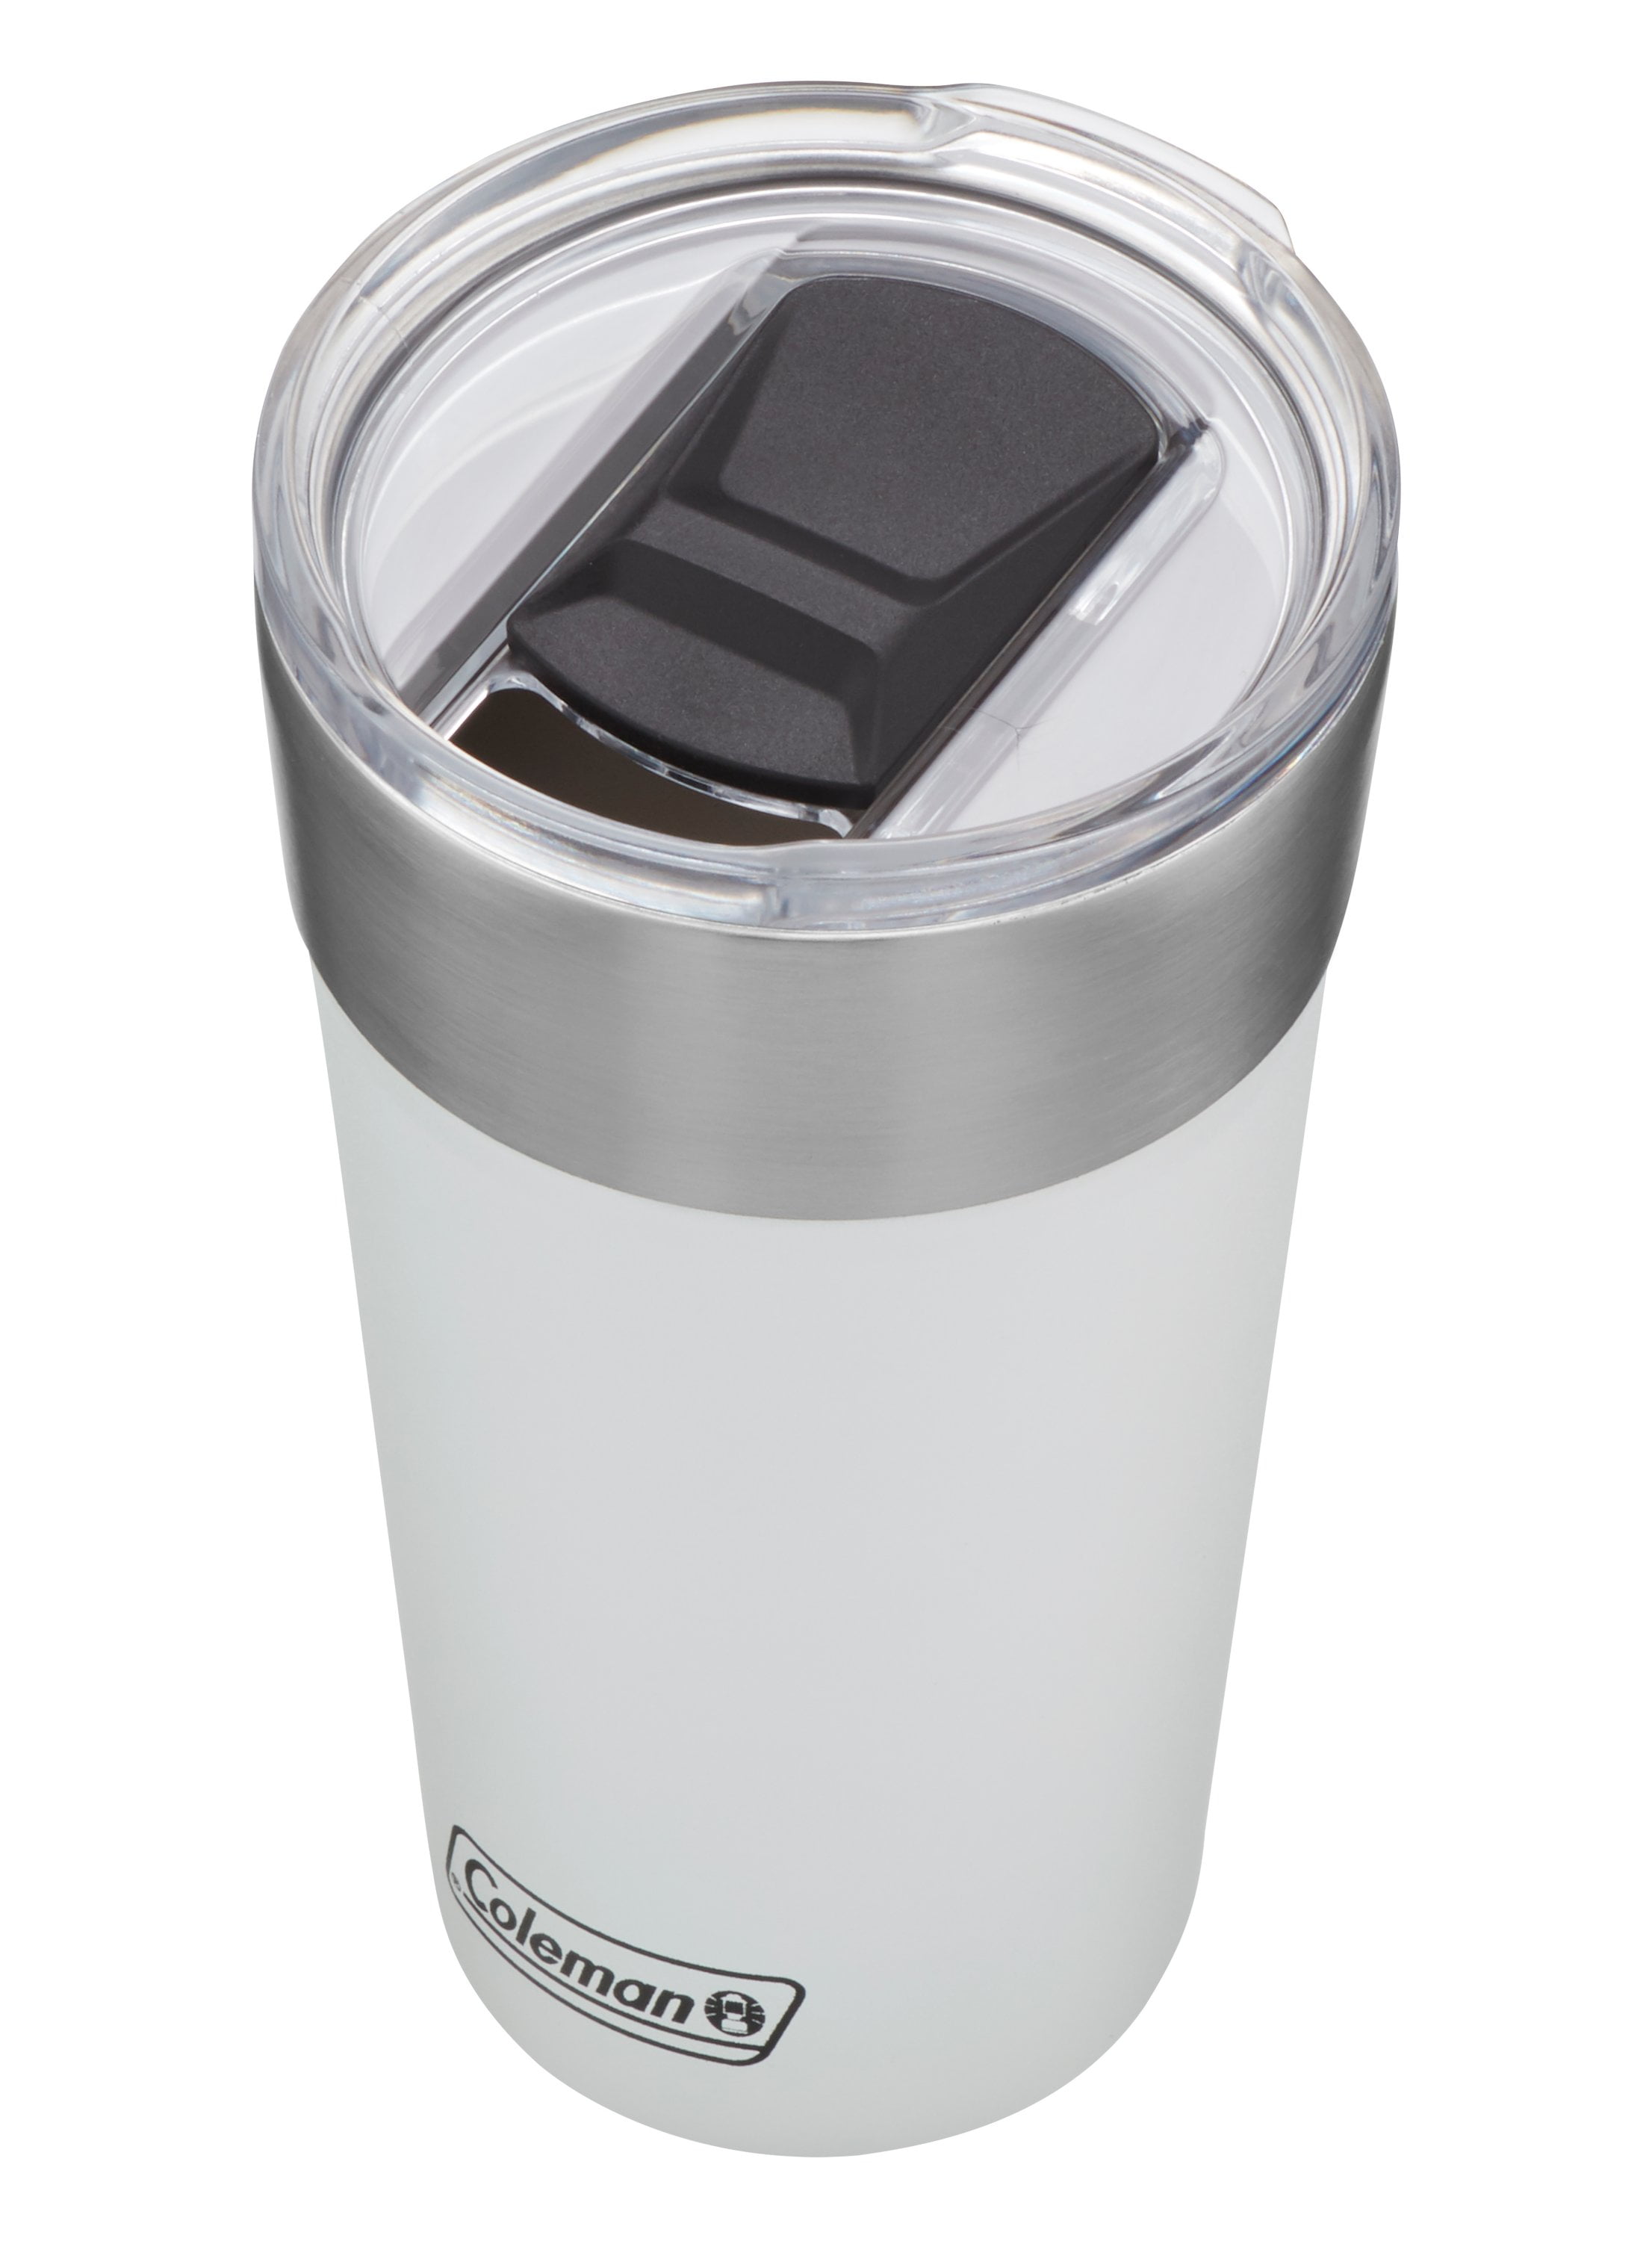  Coleman Insulated Stainless Steel 20oz Brew Tumbler, Black :  Home & Kitchen